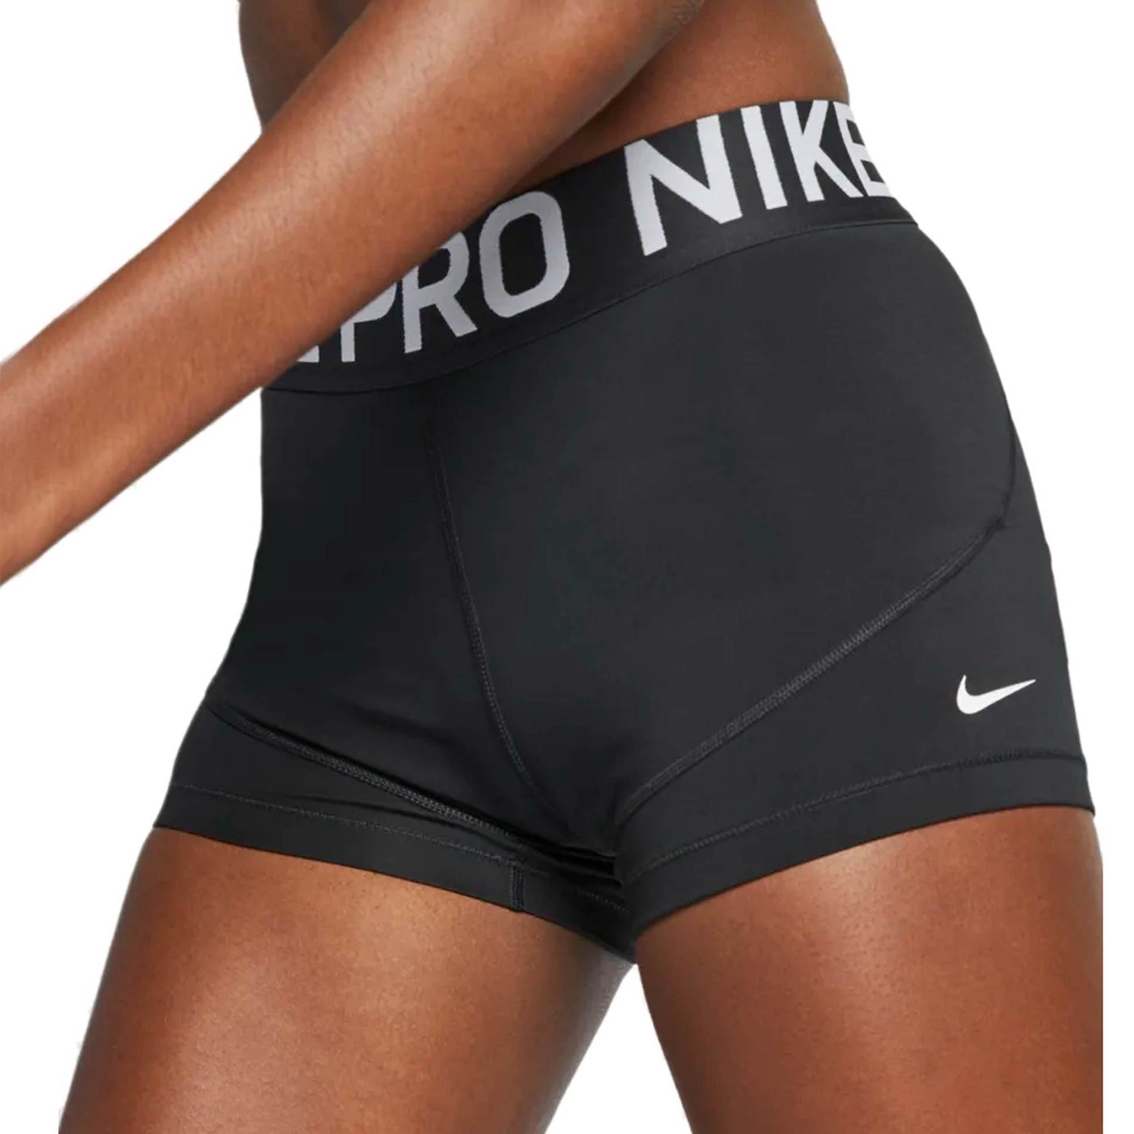 Nike Pro 3 In. Shorts, Pants, Clothing & Accessories